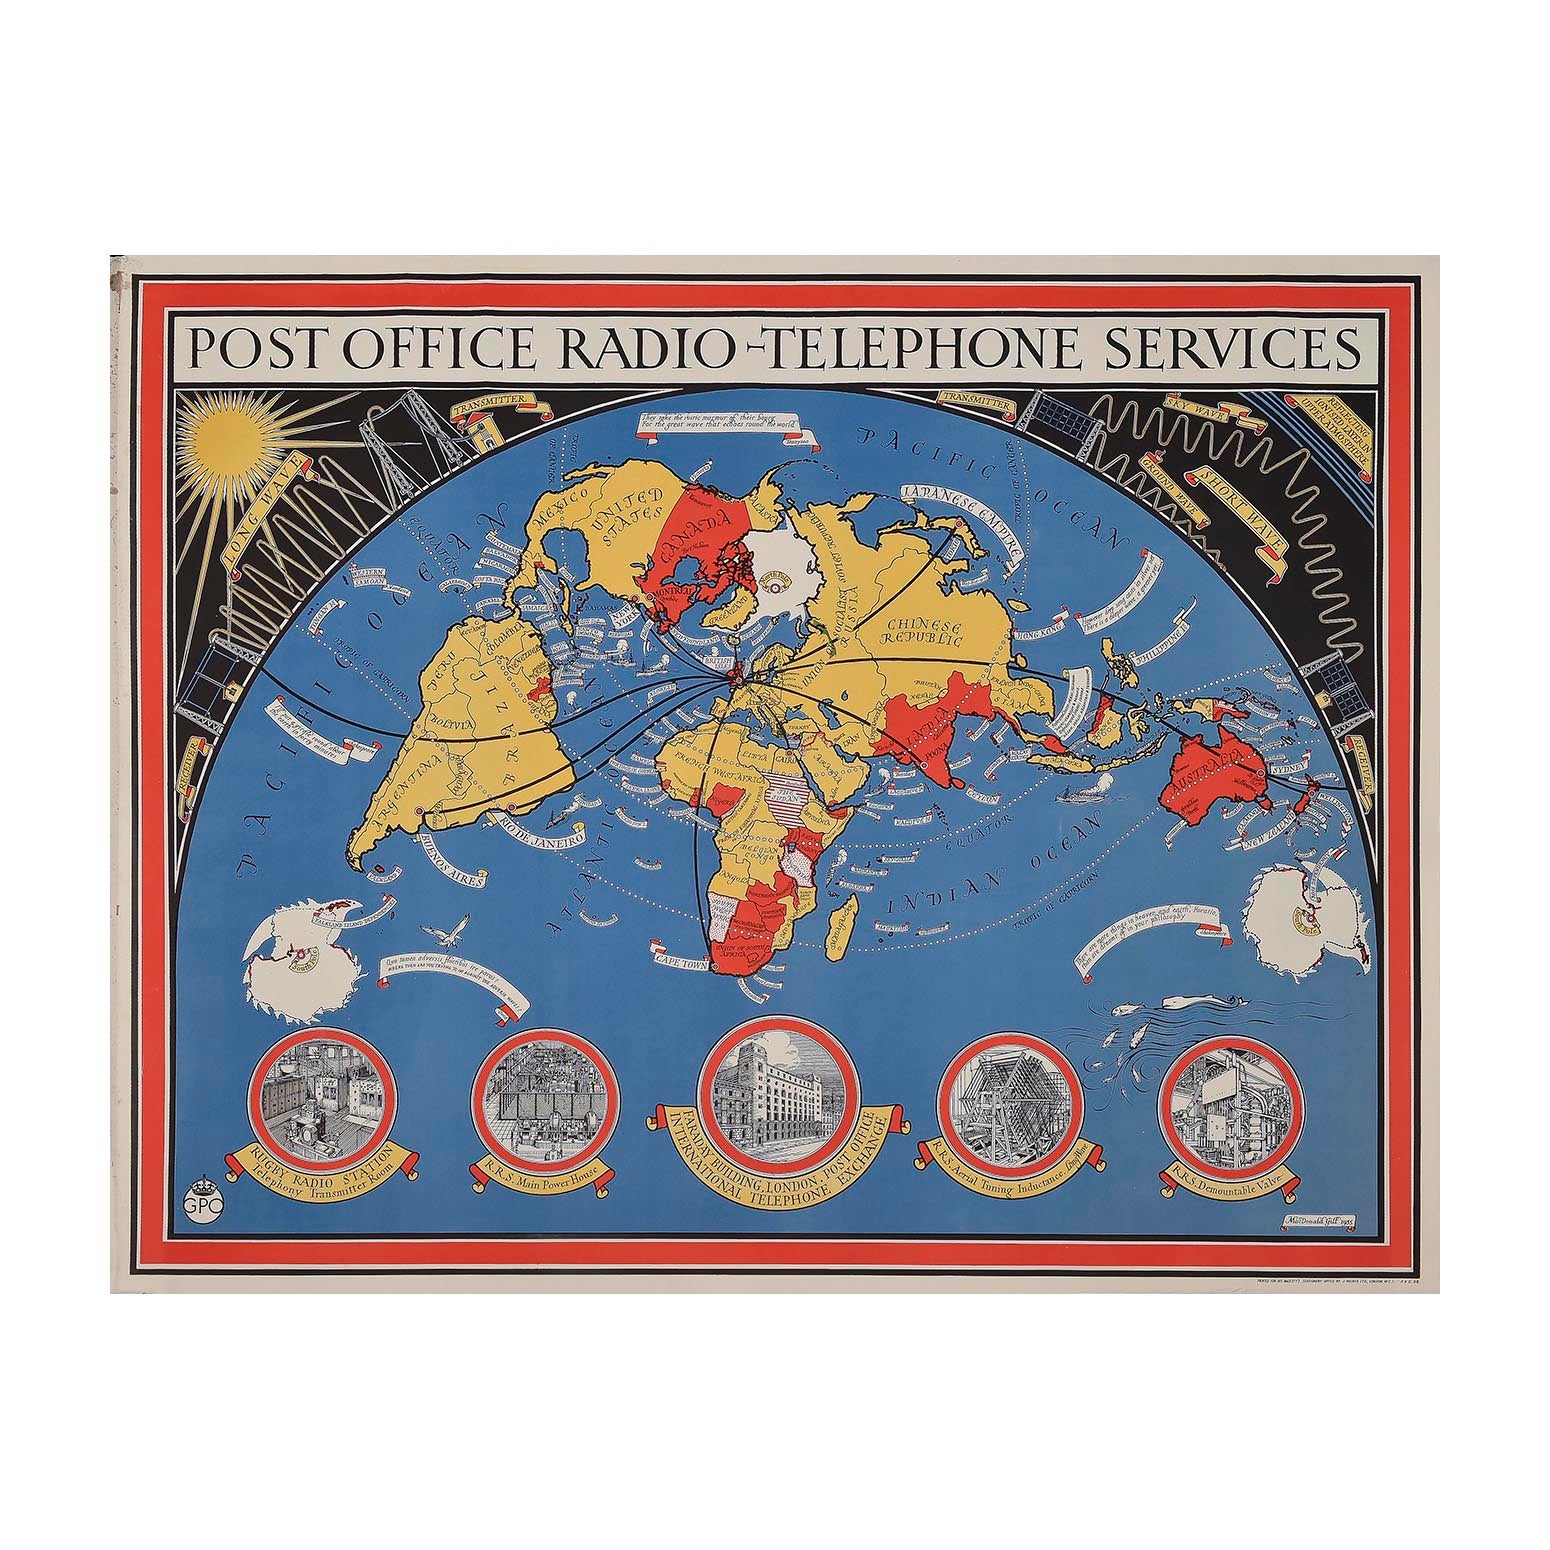 Original GPO poster map showing Post Office Radio Telephone Services designed by Leslie MacDonald Gill, 1935. Detailed map showing Britain at the centre of a global communications network stretching to South America, Japan, USA, South Africa and New Zealand. Along the base are a series of charming vignettes depicting Rugby Radio Station (RRS), RRS Main Power Station, the Faraday Building and International Telephone Exchange (London), RRS Aerial Timing Inductance and RRS Demountable Vale. 